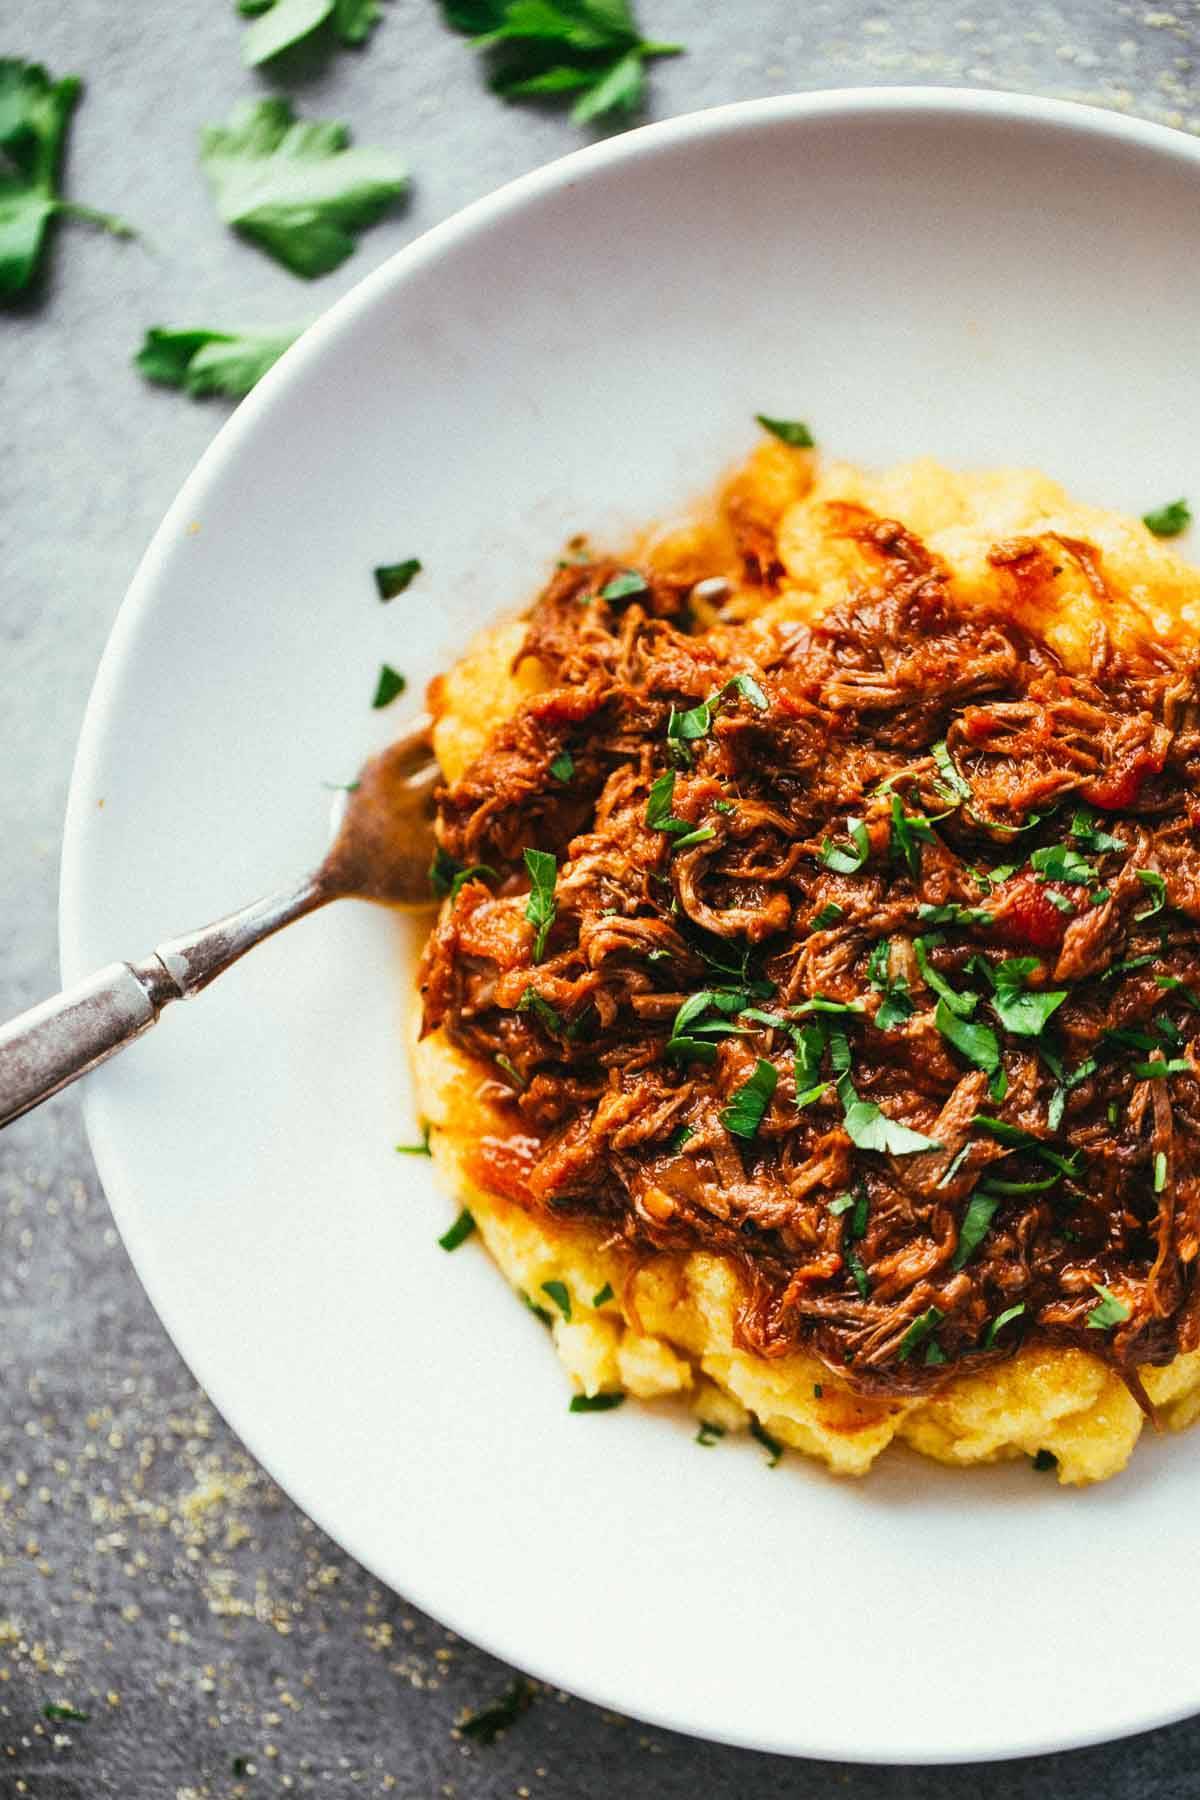 Crockpot Braised Beef Ragu with Polenta on a white plate with a fork.